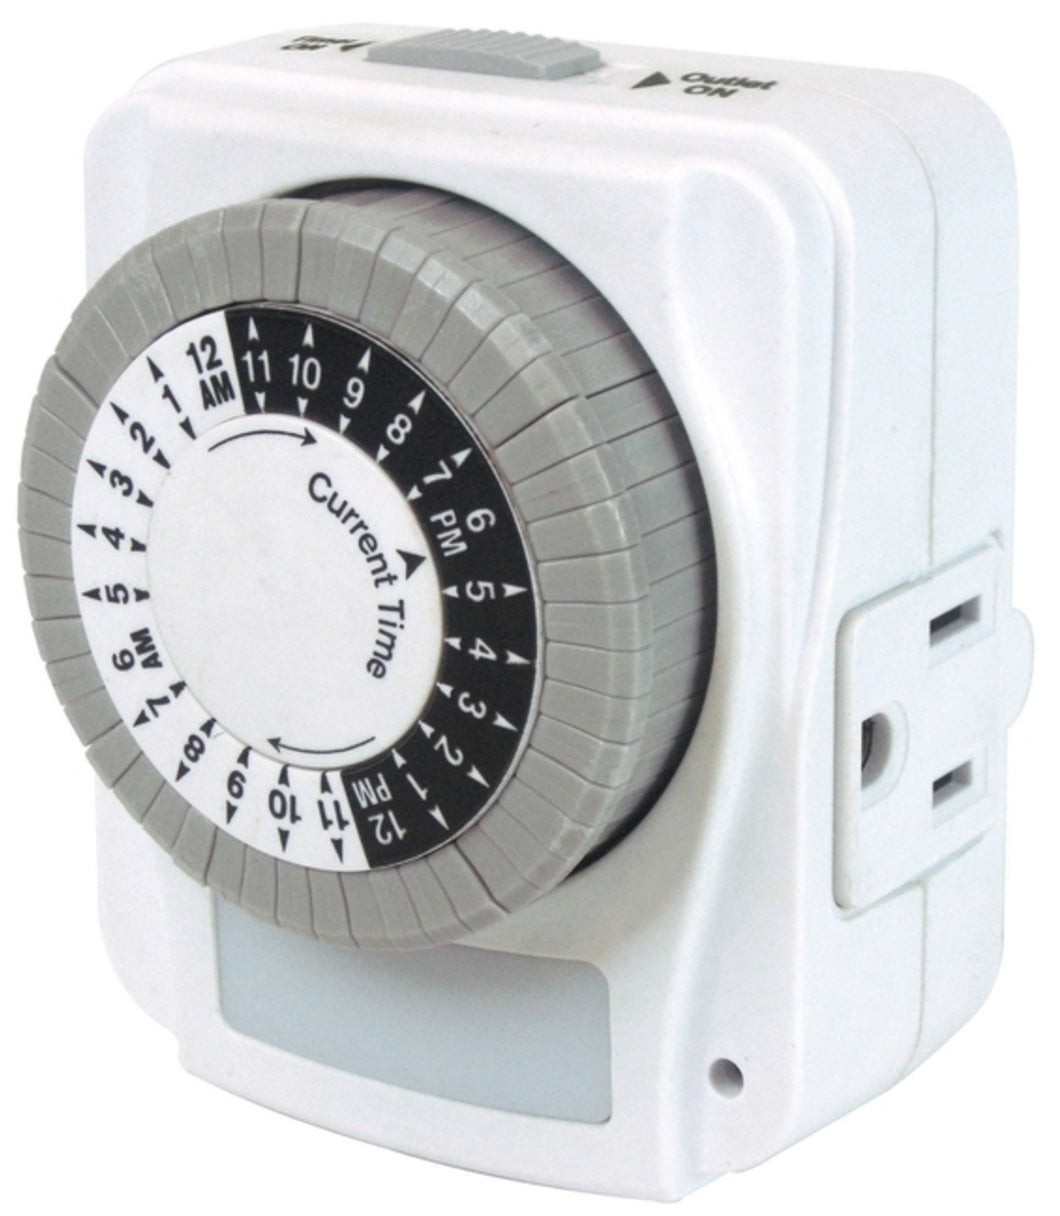 Prime Wire & Cable TNINL2412-RC 24 Hour Mechanical Timer With Nightlight, White